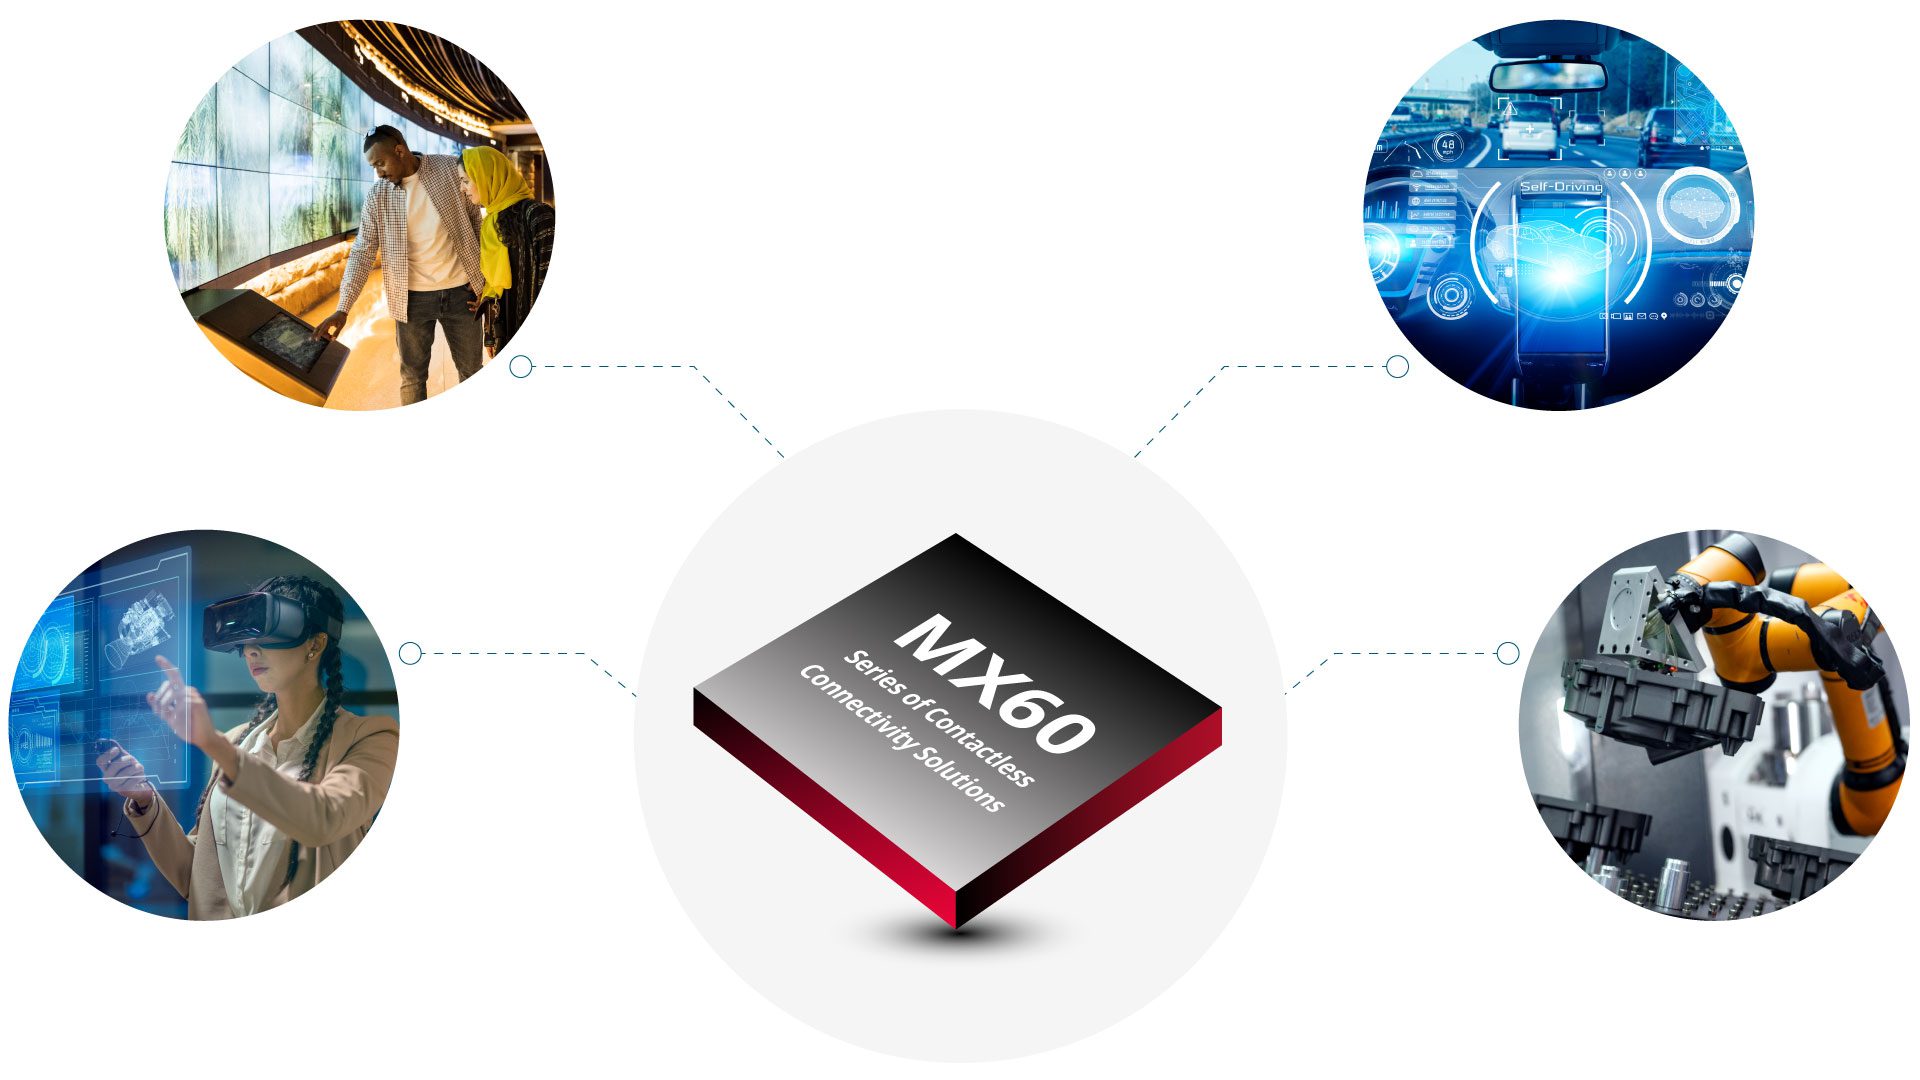 Molex debuted the MX60 series of contactless connectivity solutions